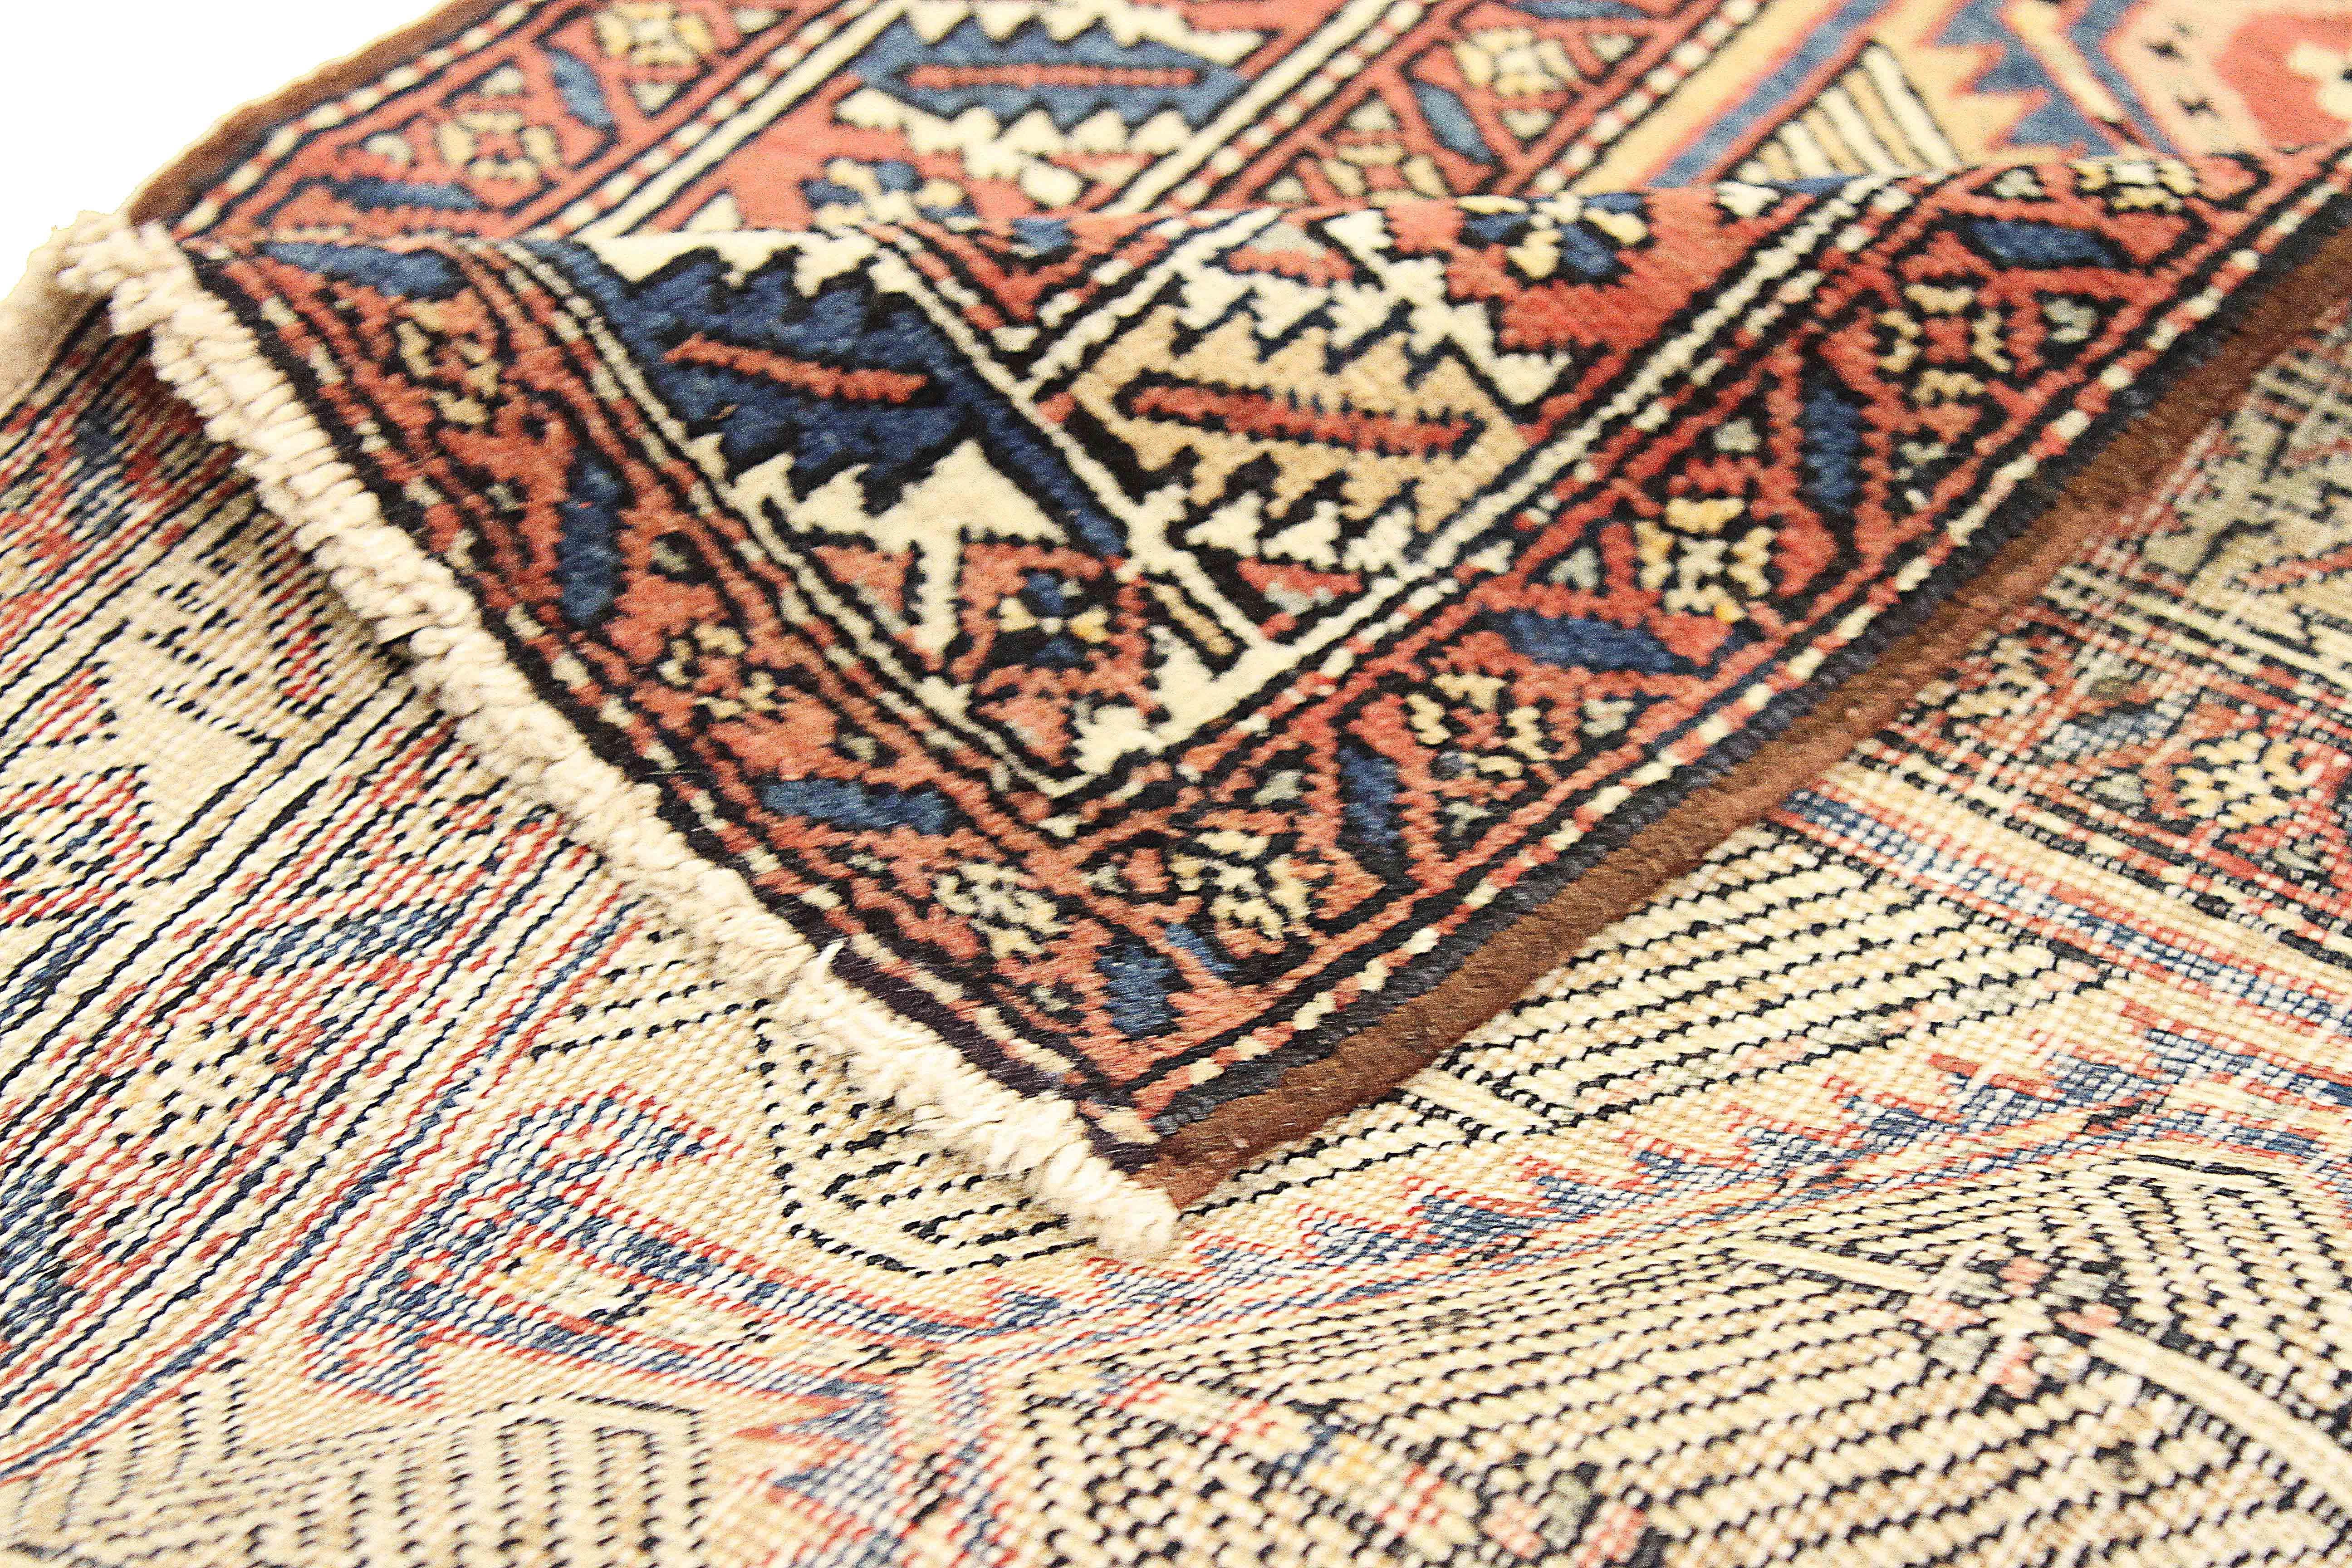 Hand-Woven Antique Persian Sarab Runner Rug with Red and Blue Geometric Details For Sale